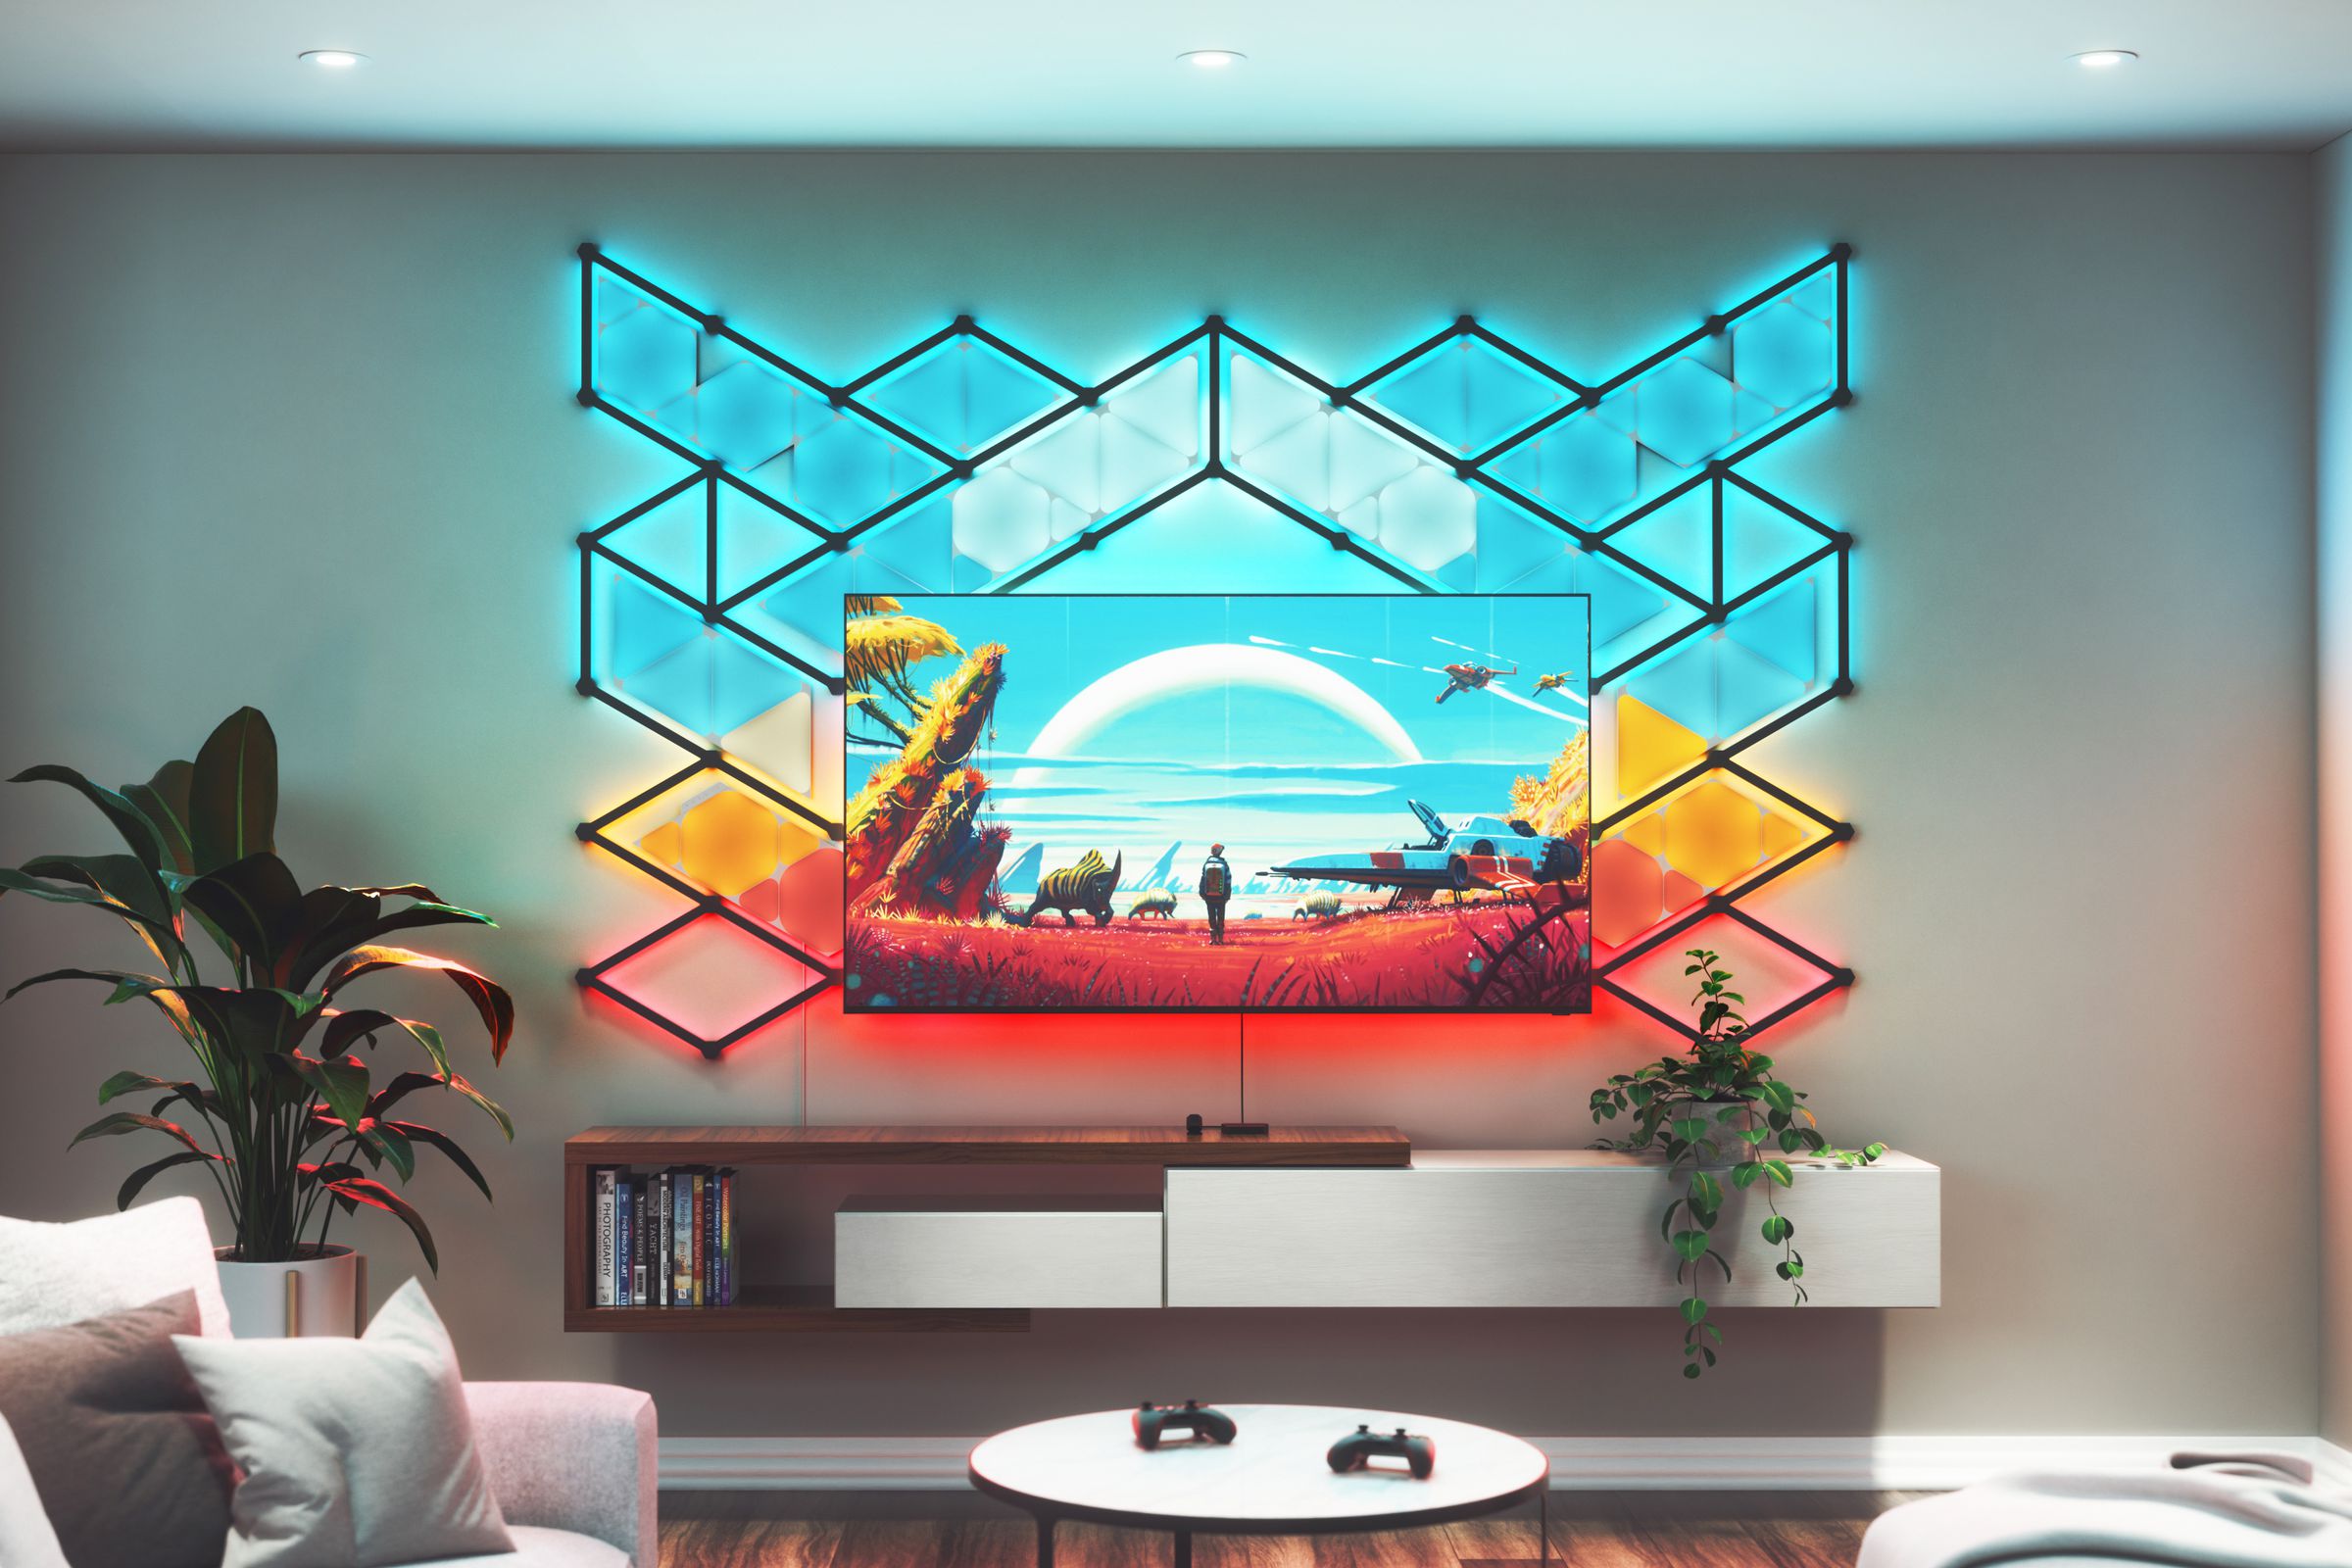 The 4D TV Smarter Kit can be linked with other Nanoleaf products for a truly immersive experience.